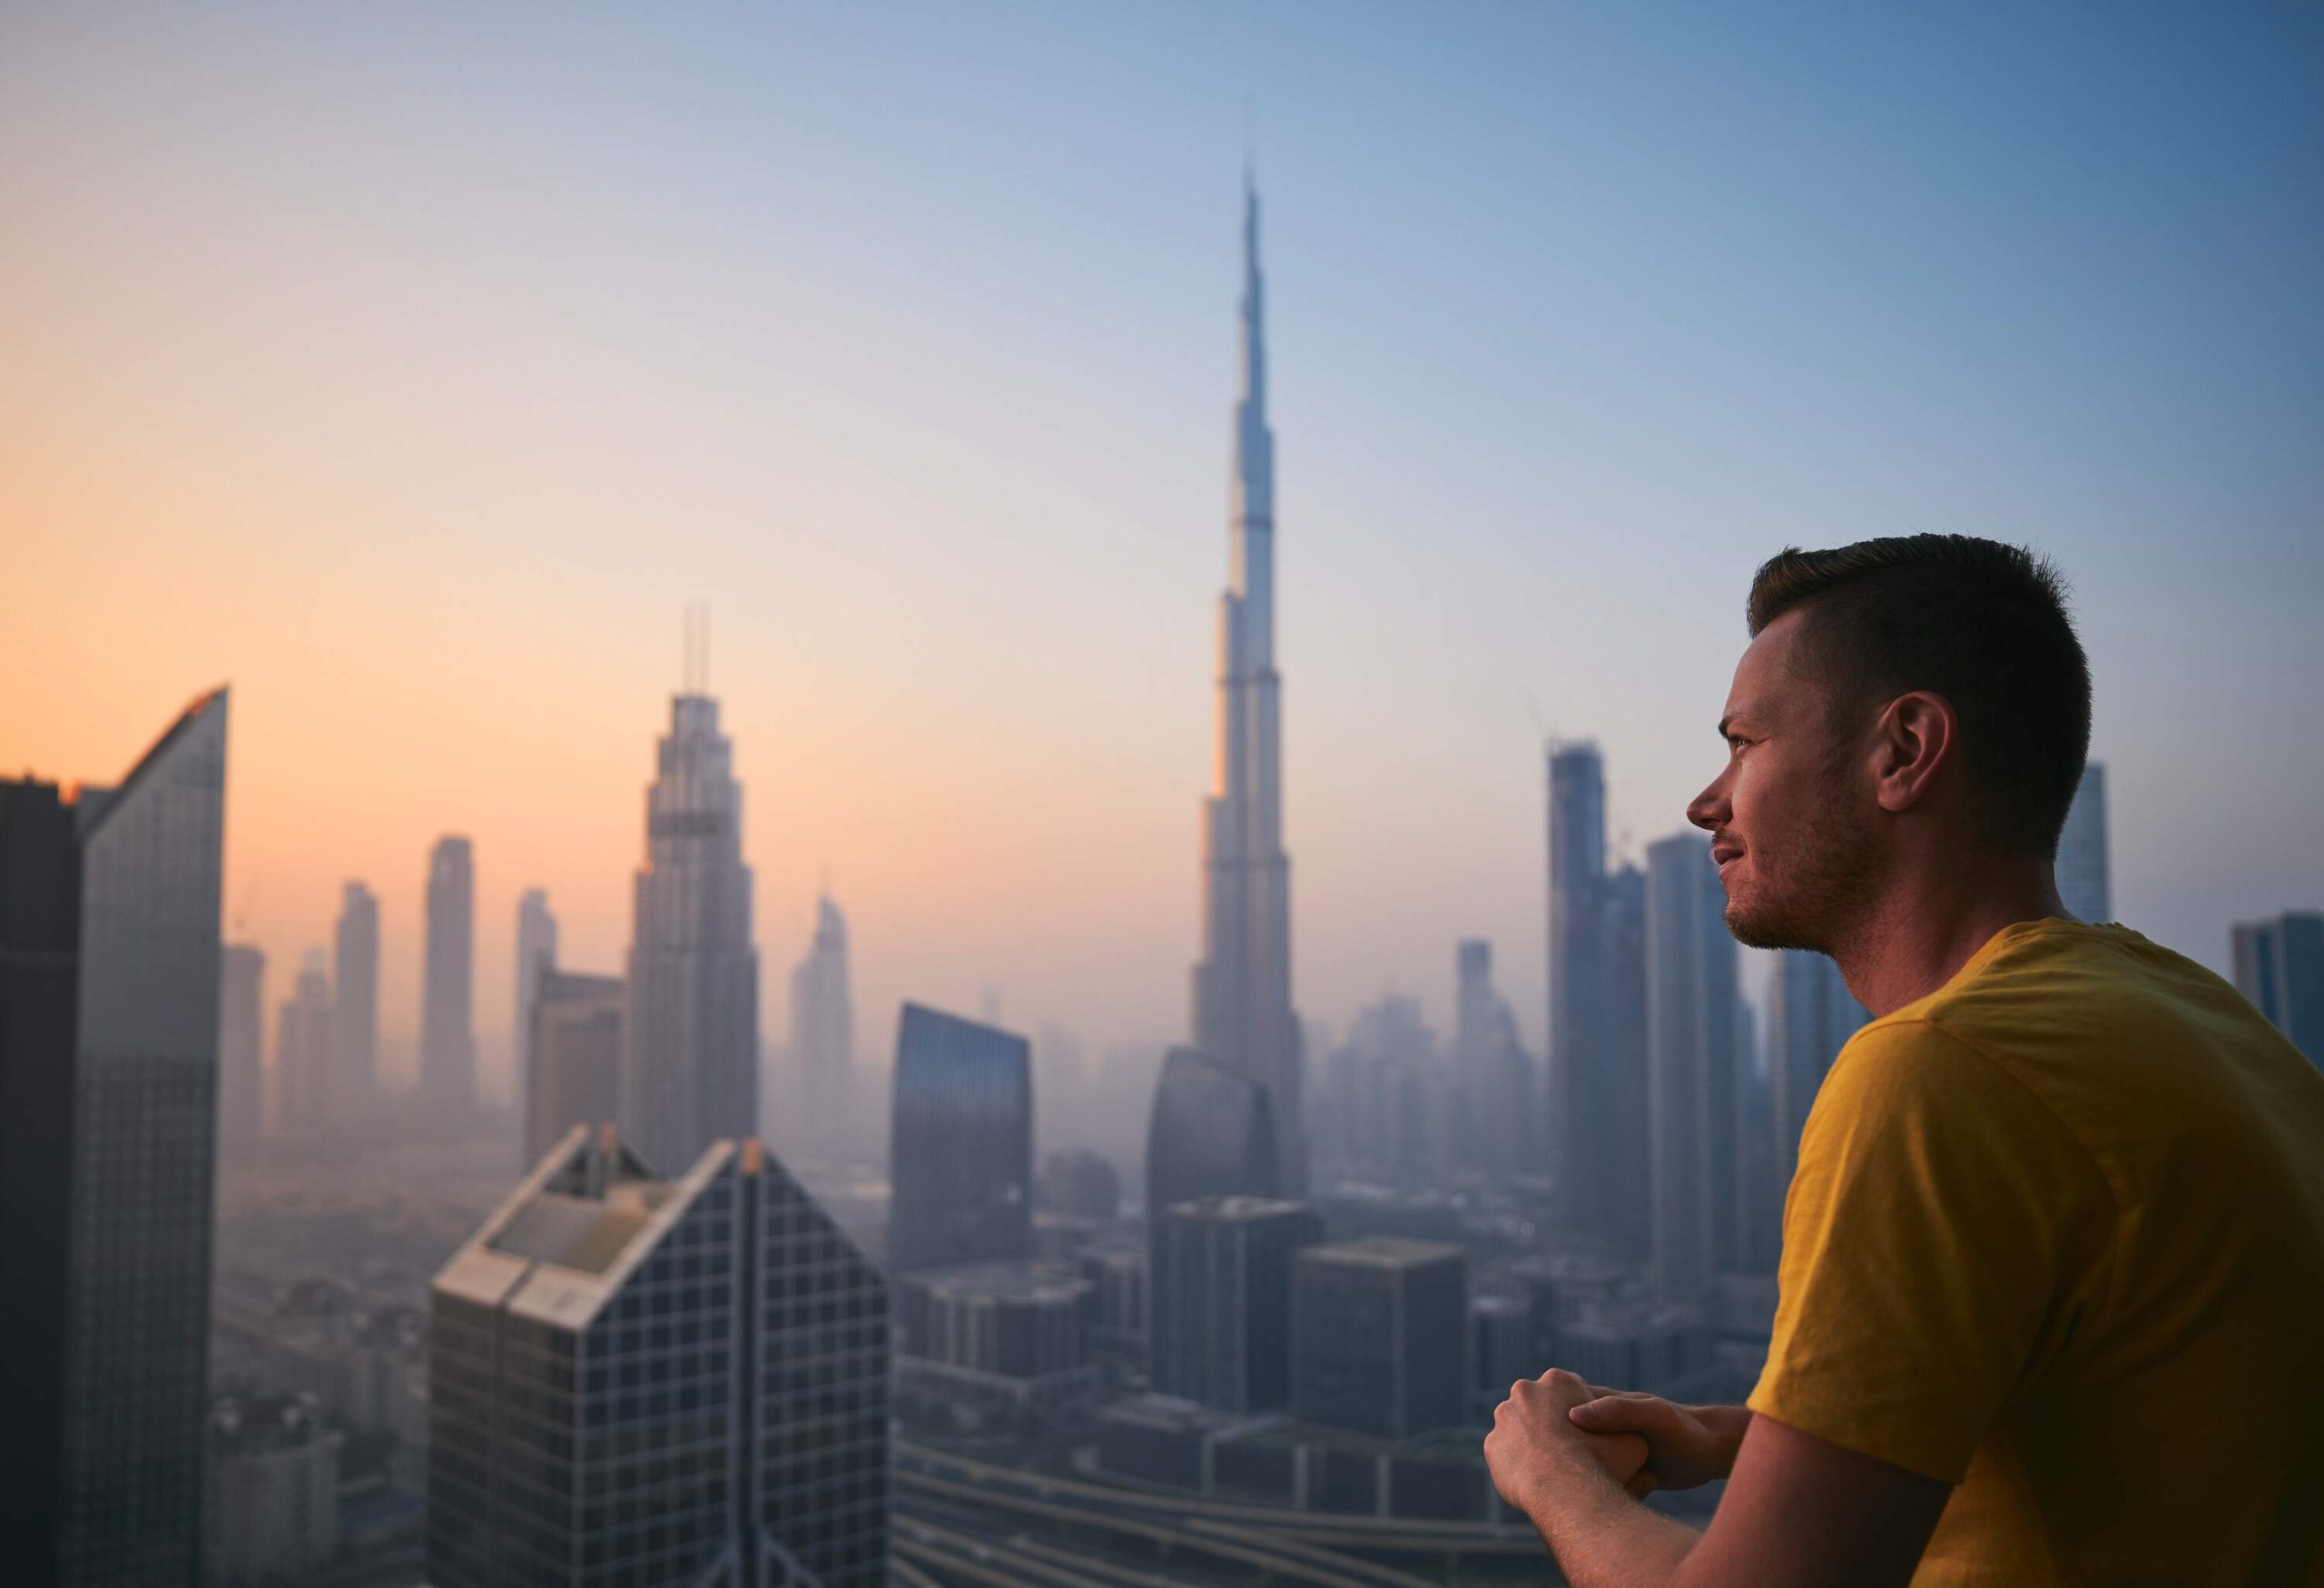 A man on a terrace looks at a city skyline with skyscrapers on a foggy morning.